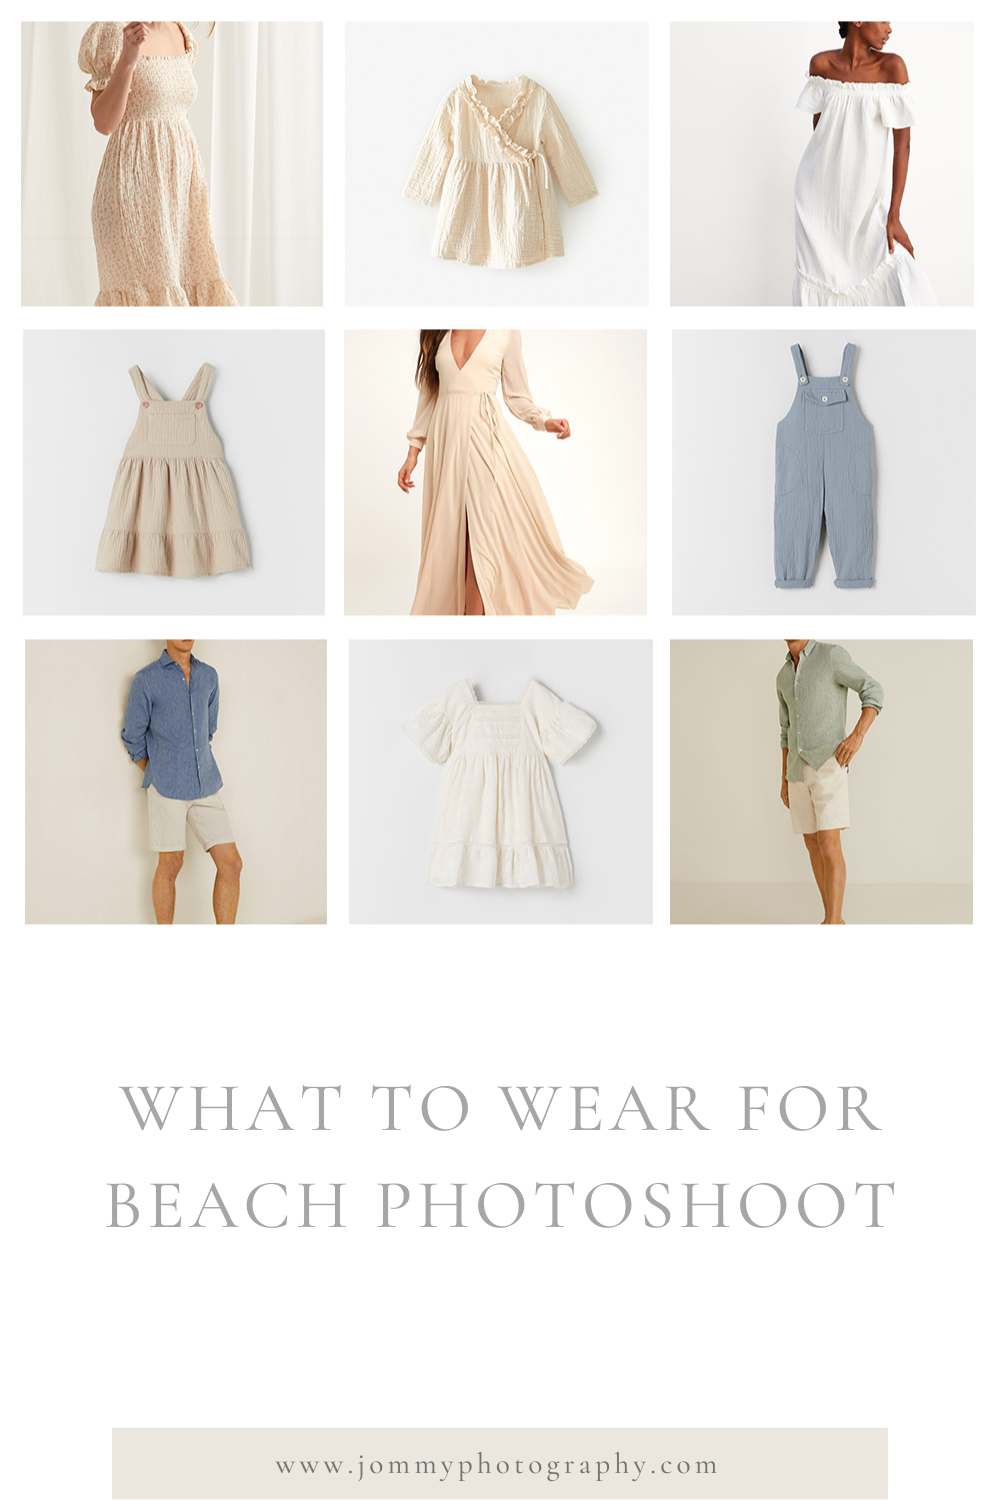 Outfits for beach photoshoot